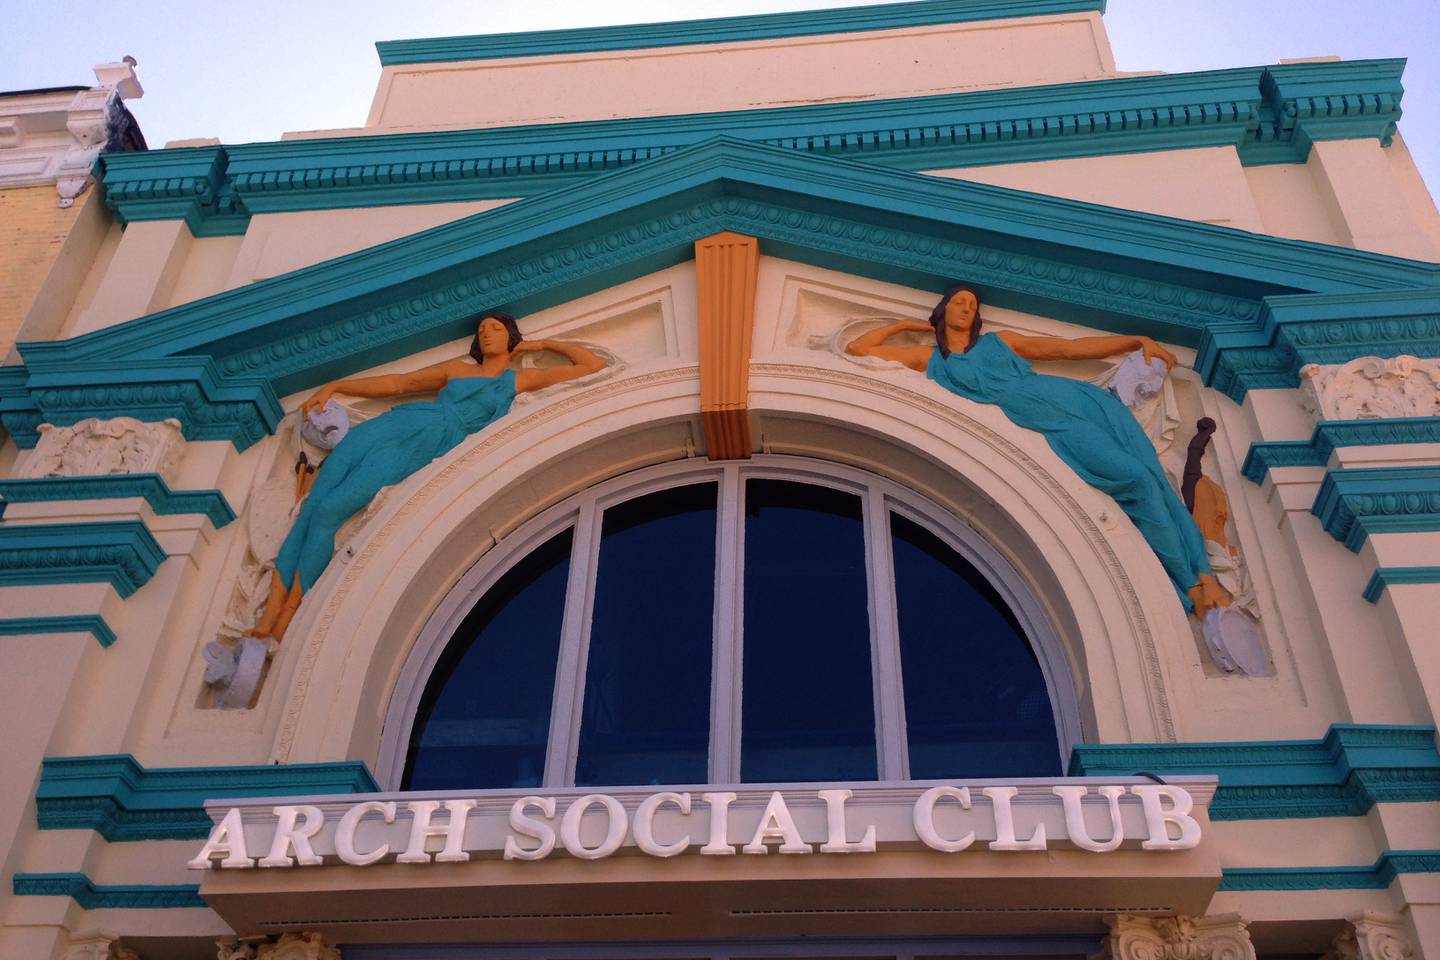 An image of the facade of the Arch Social Club after its restoration.